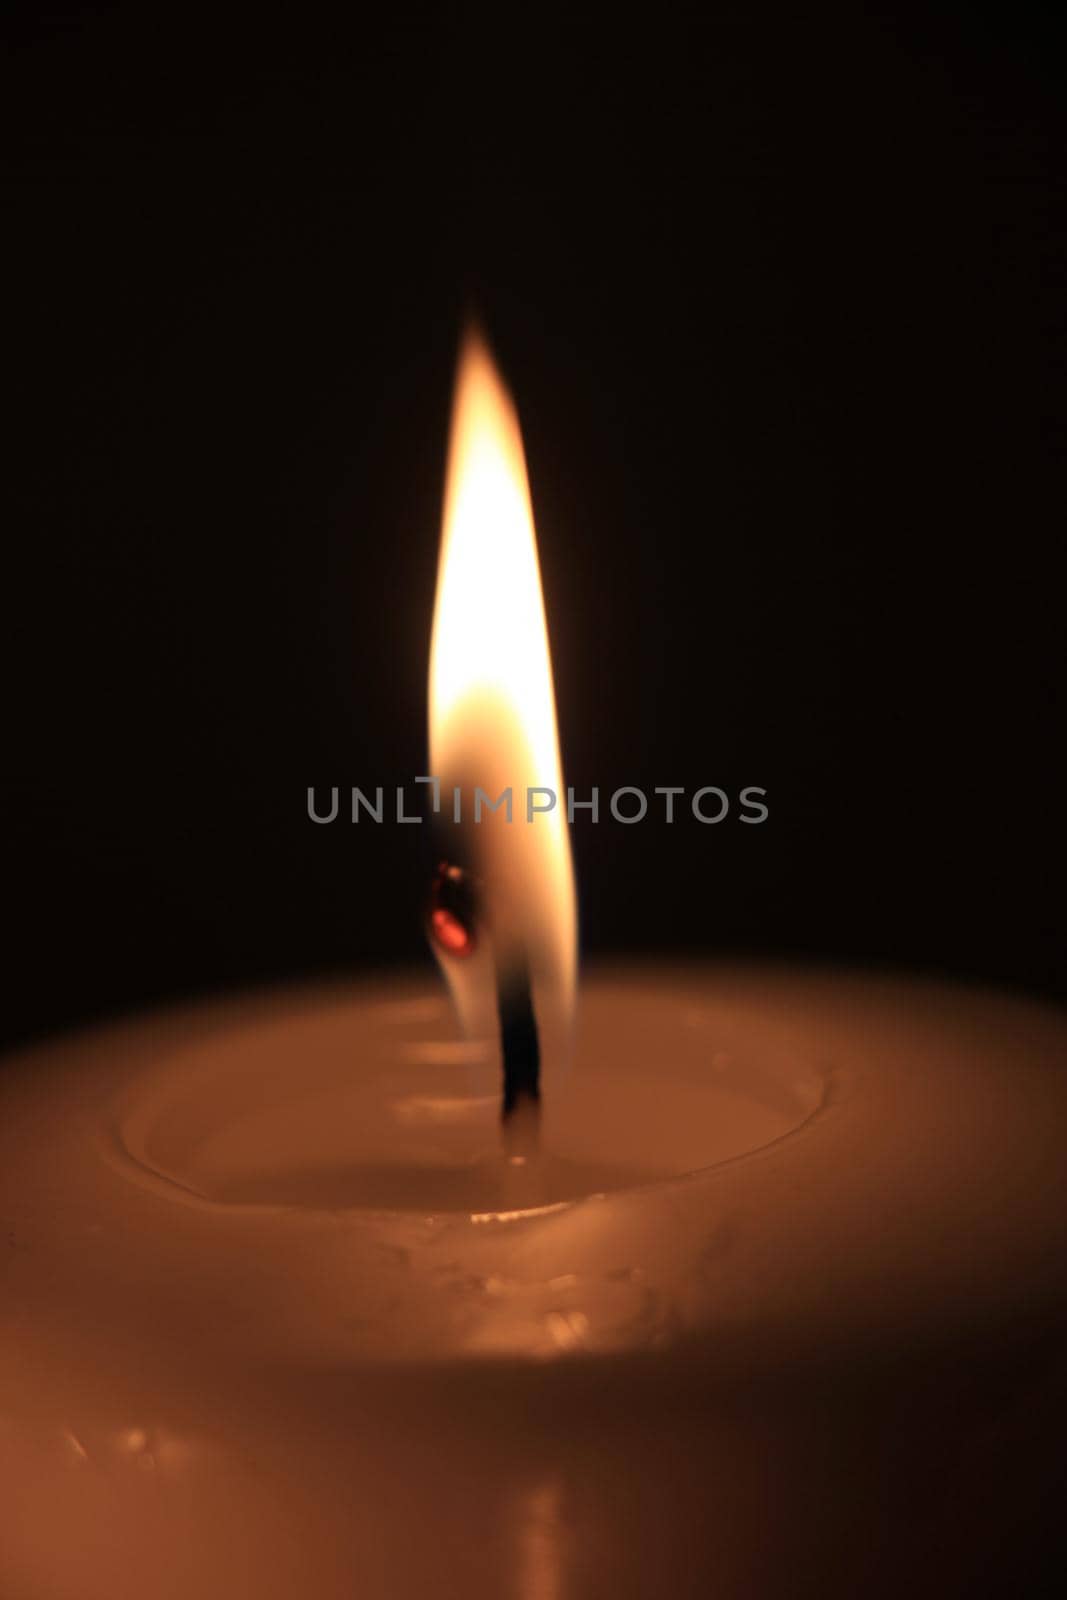 Burning candle in closeup, big flame and melted wax by studioportosabbia